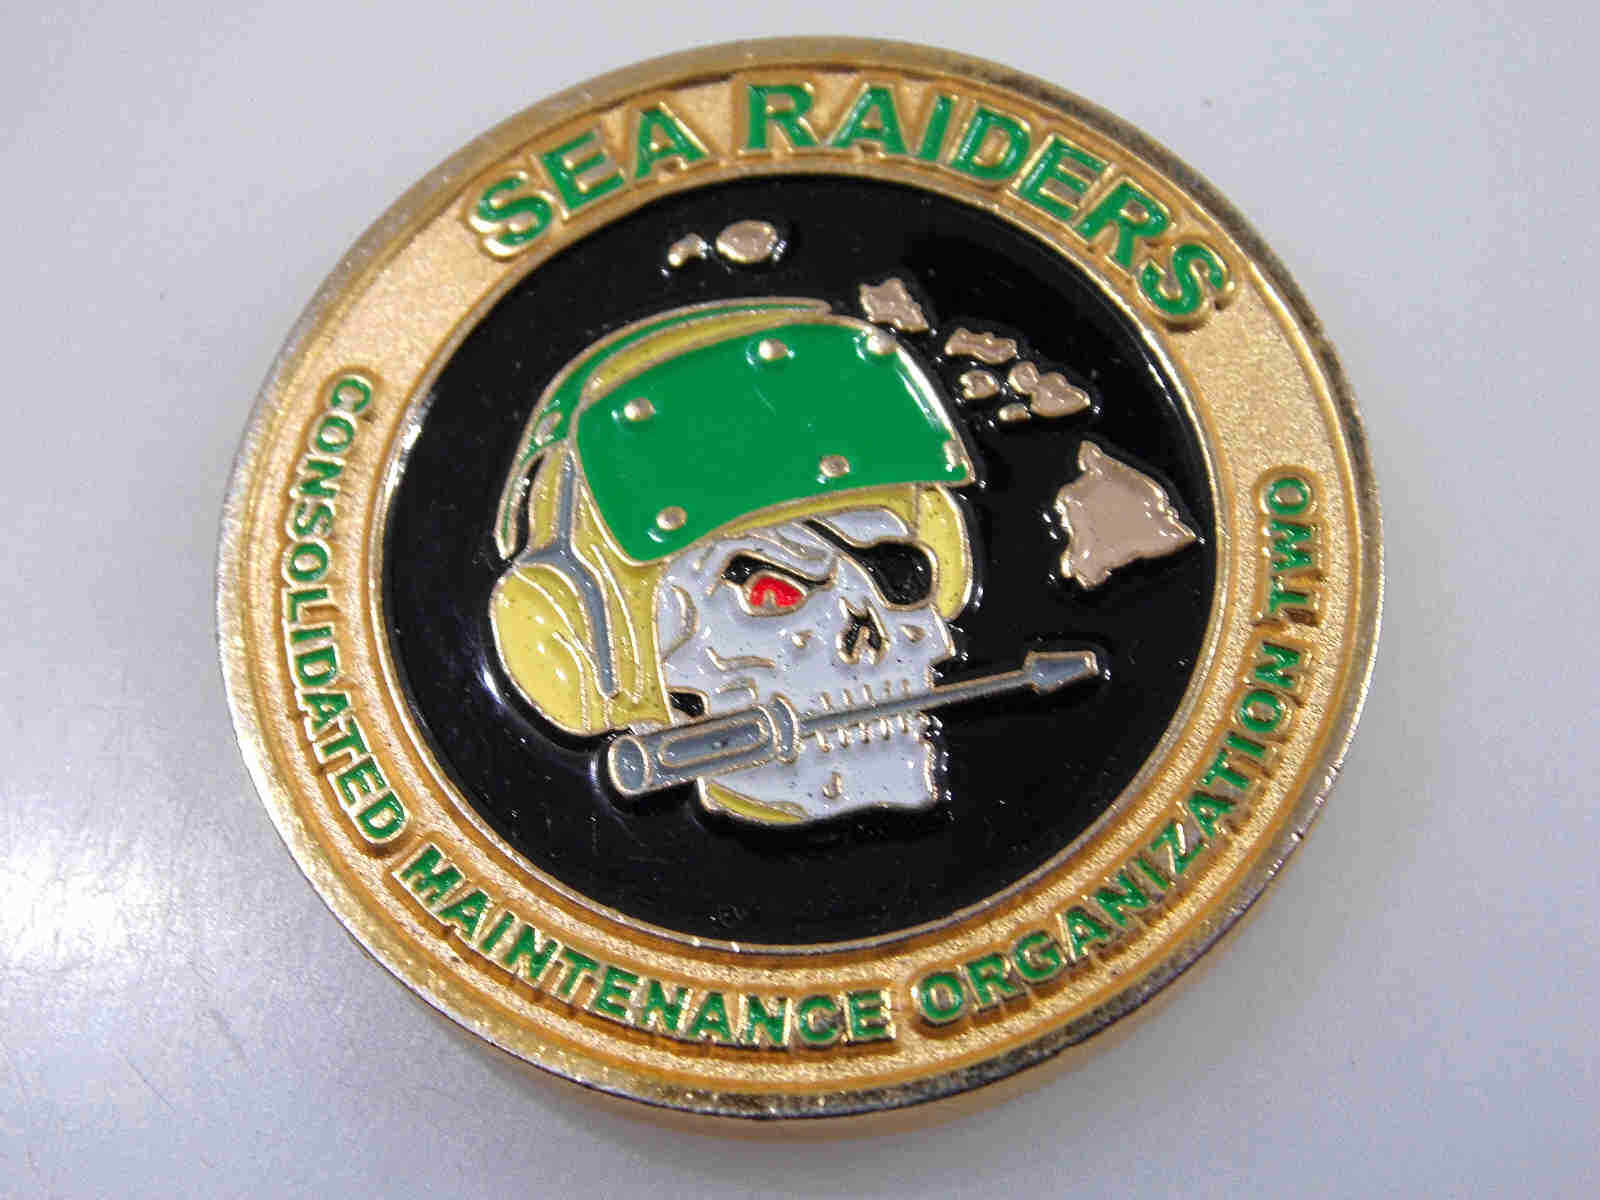 SEA RAIDERS CONSOLODATED MAINTENANCE ORGANIZATION TWO CHALLENGE COIN